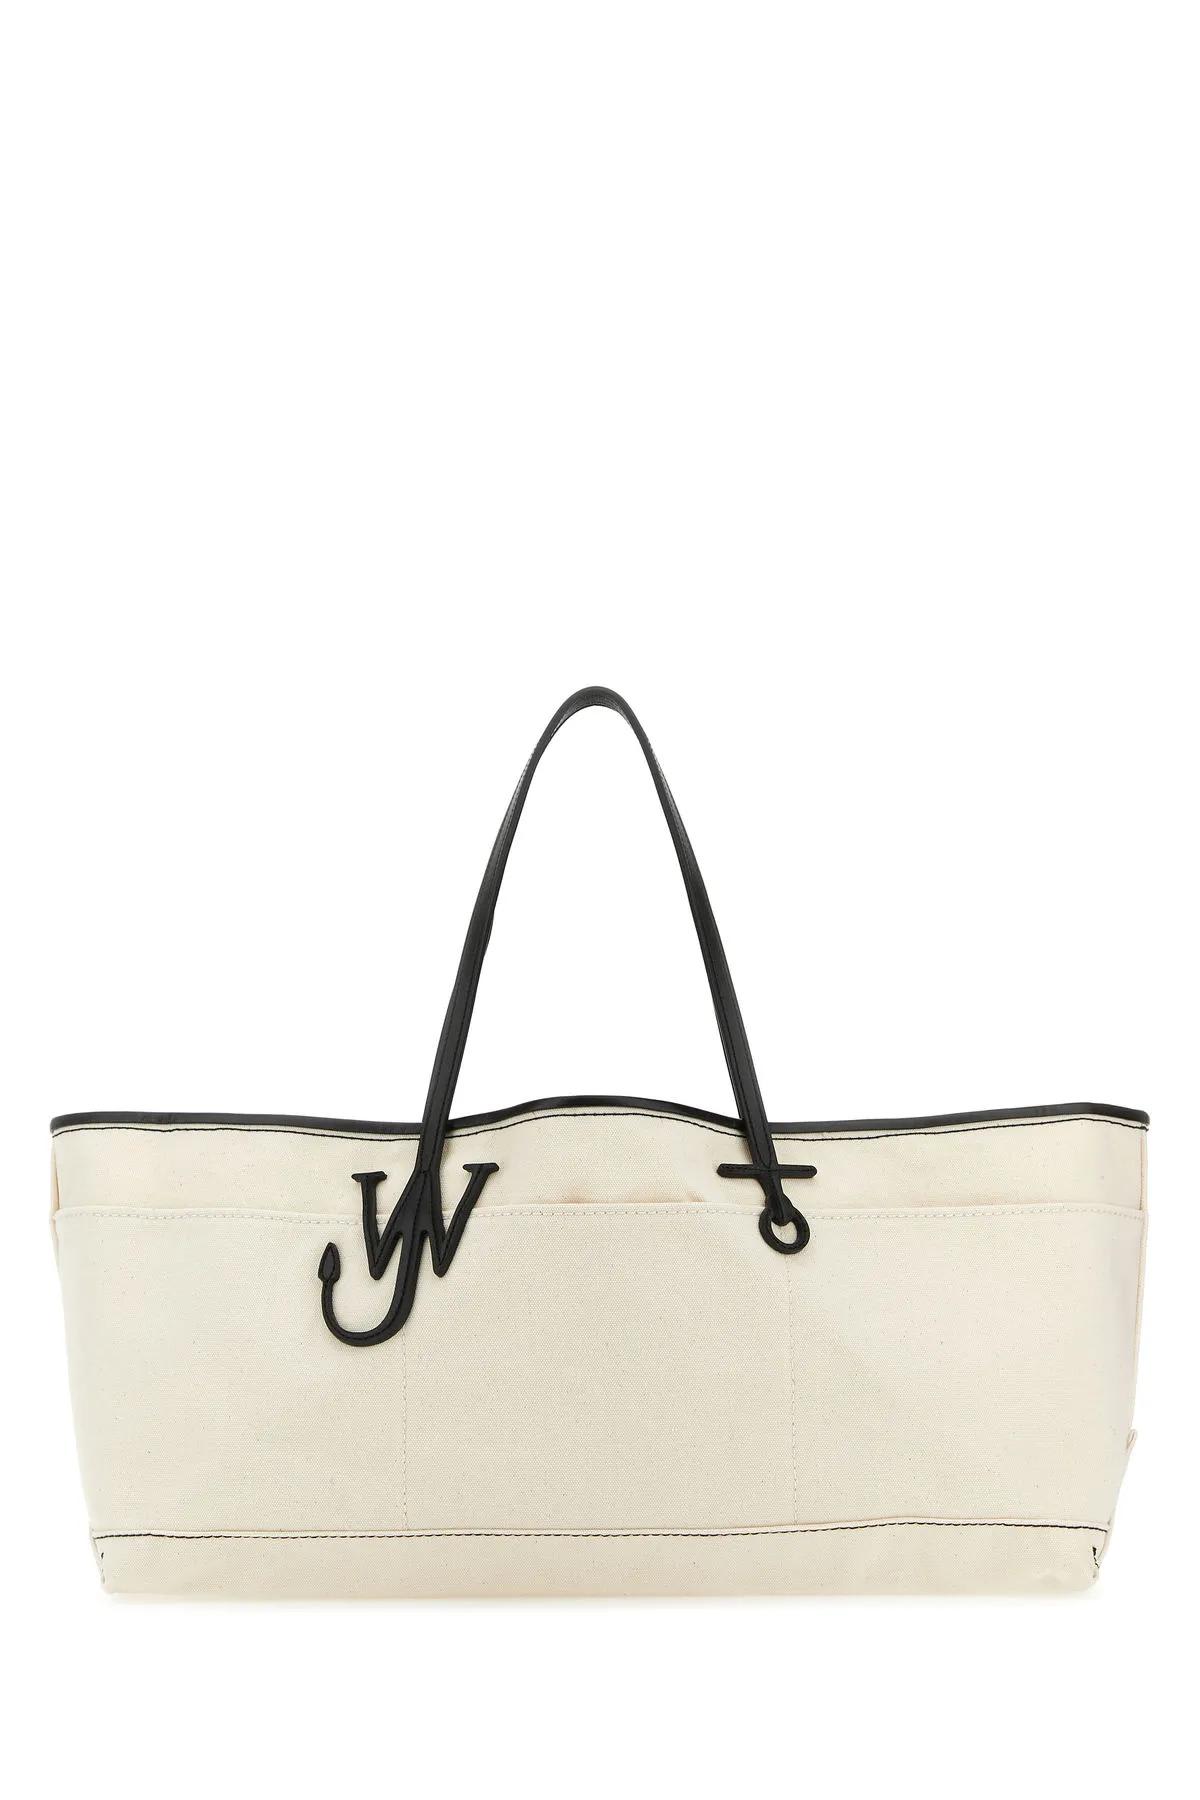 JW ANDERSON IVORY CANVAS ANCHOR SHOPPING BAG